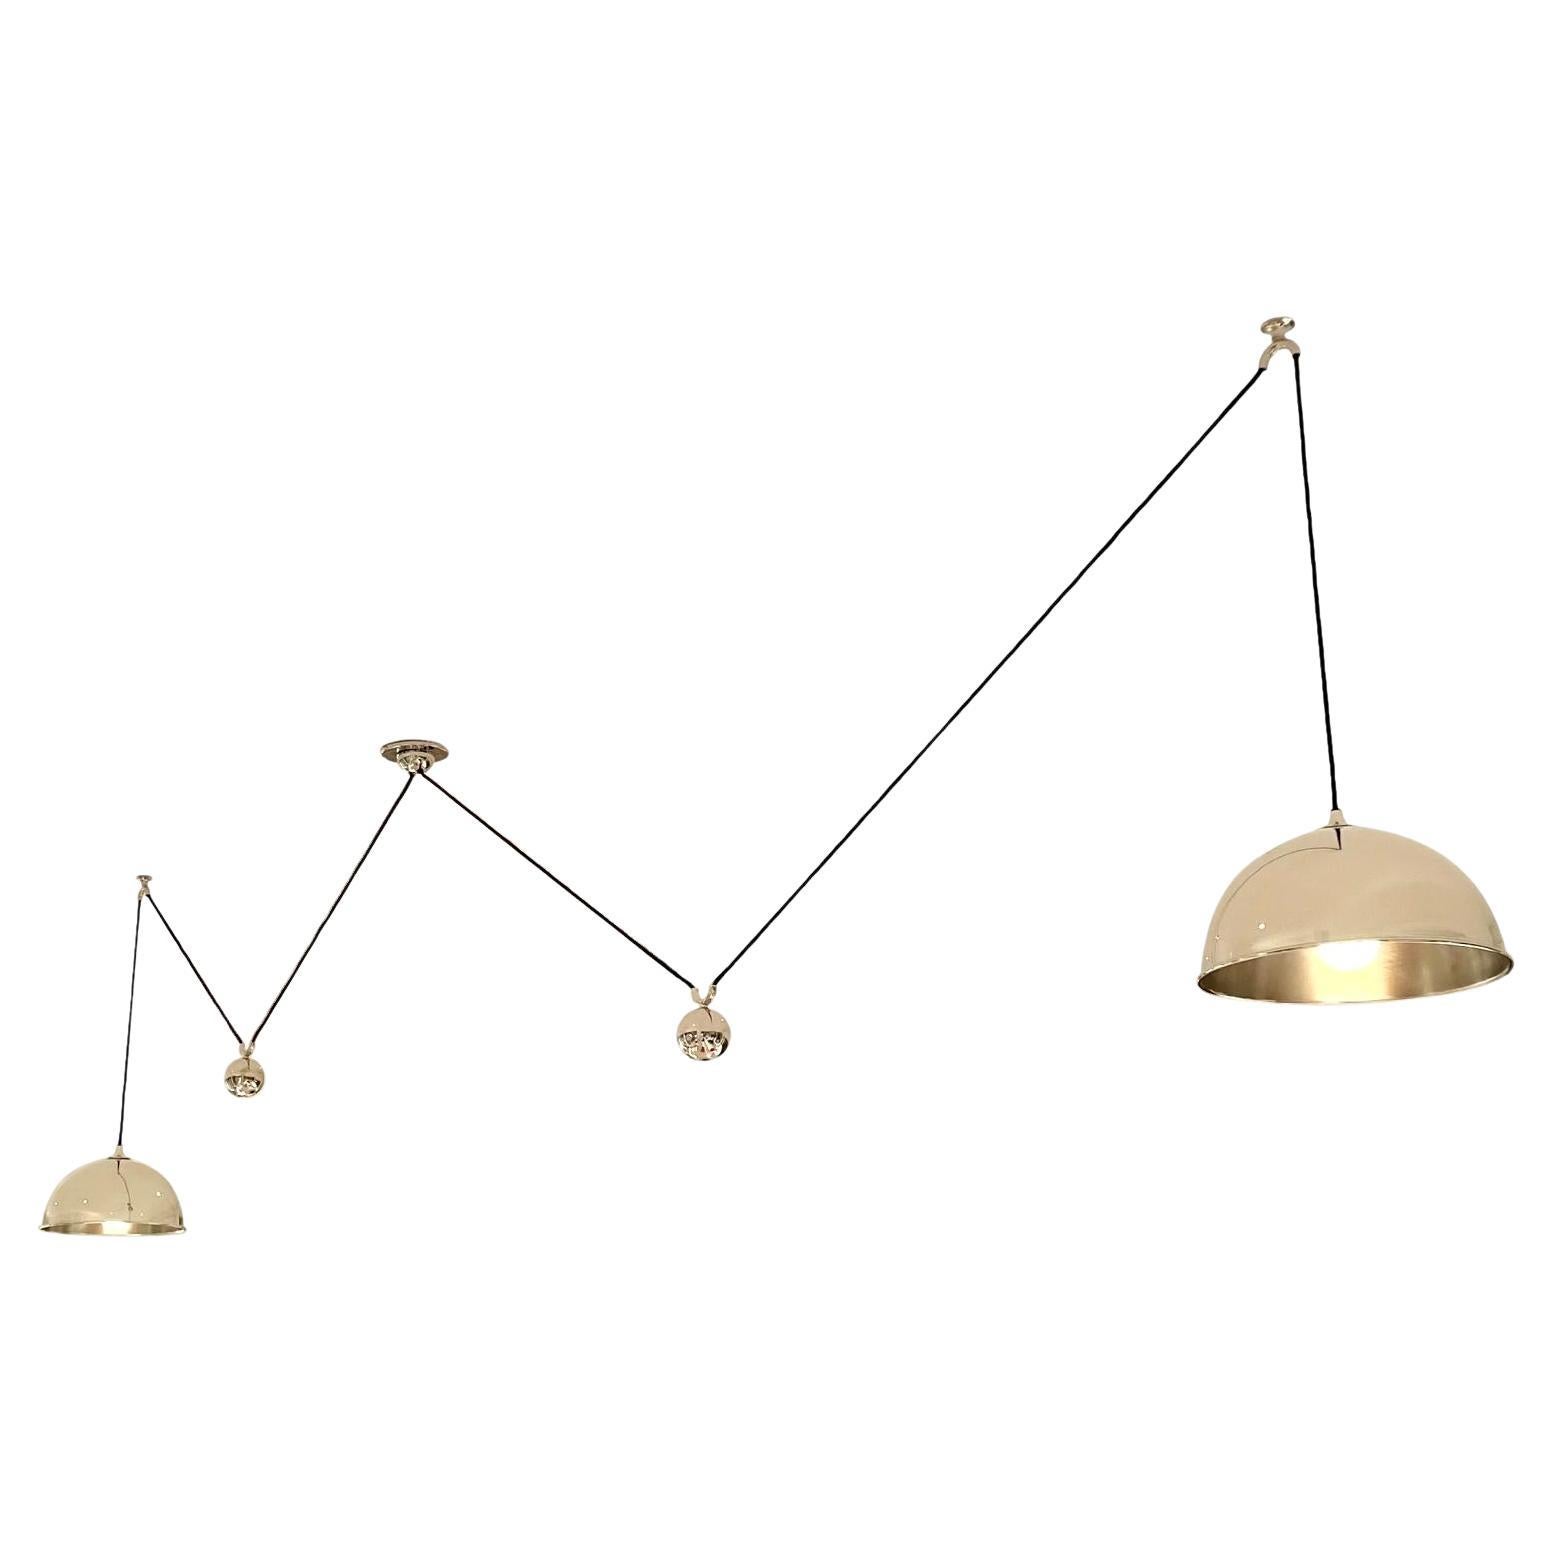 Florian Schulz Nickel Double Counter Balance Chandelier, 1980s Germany For Sale